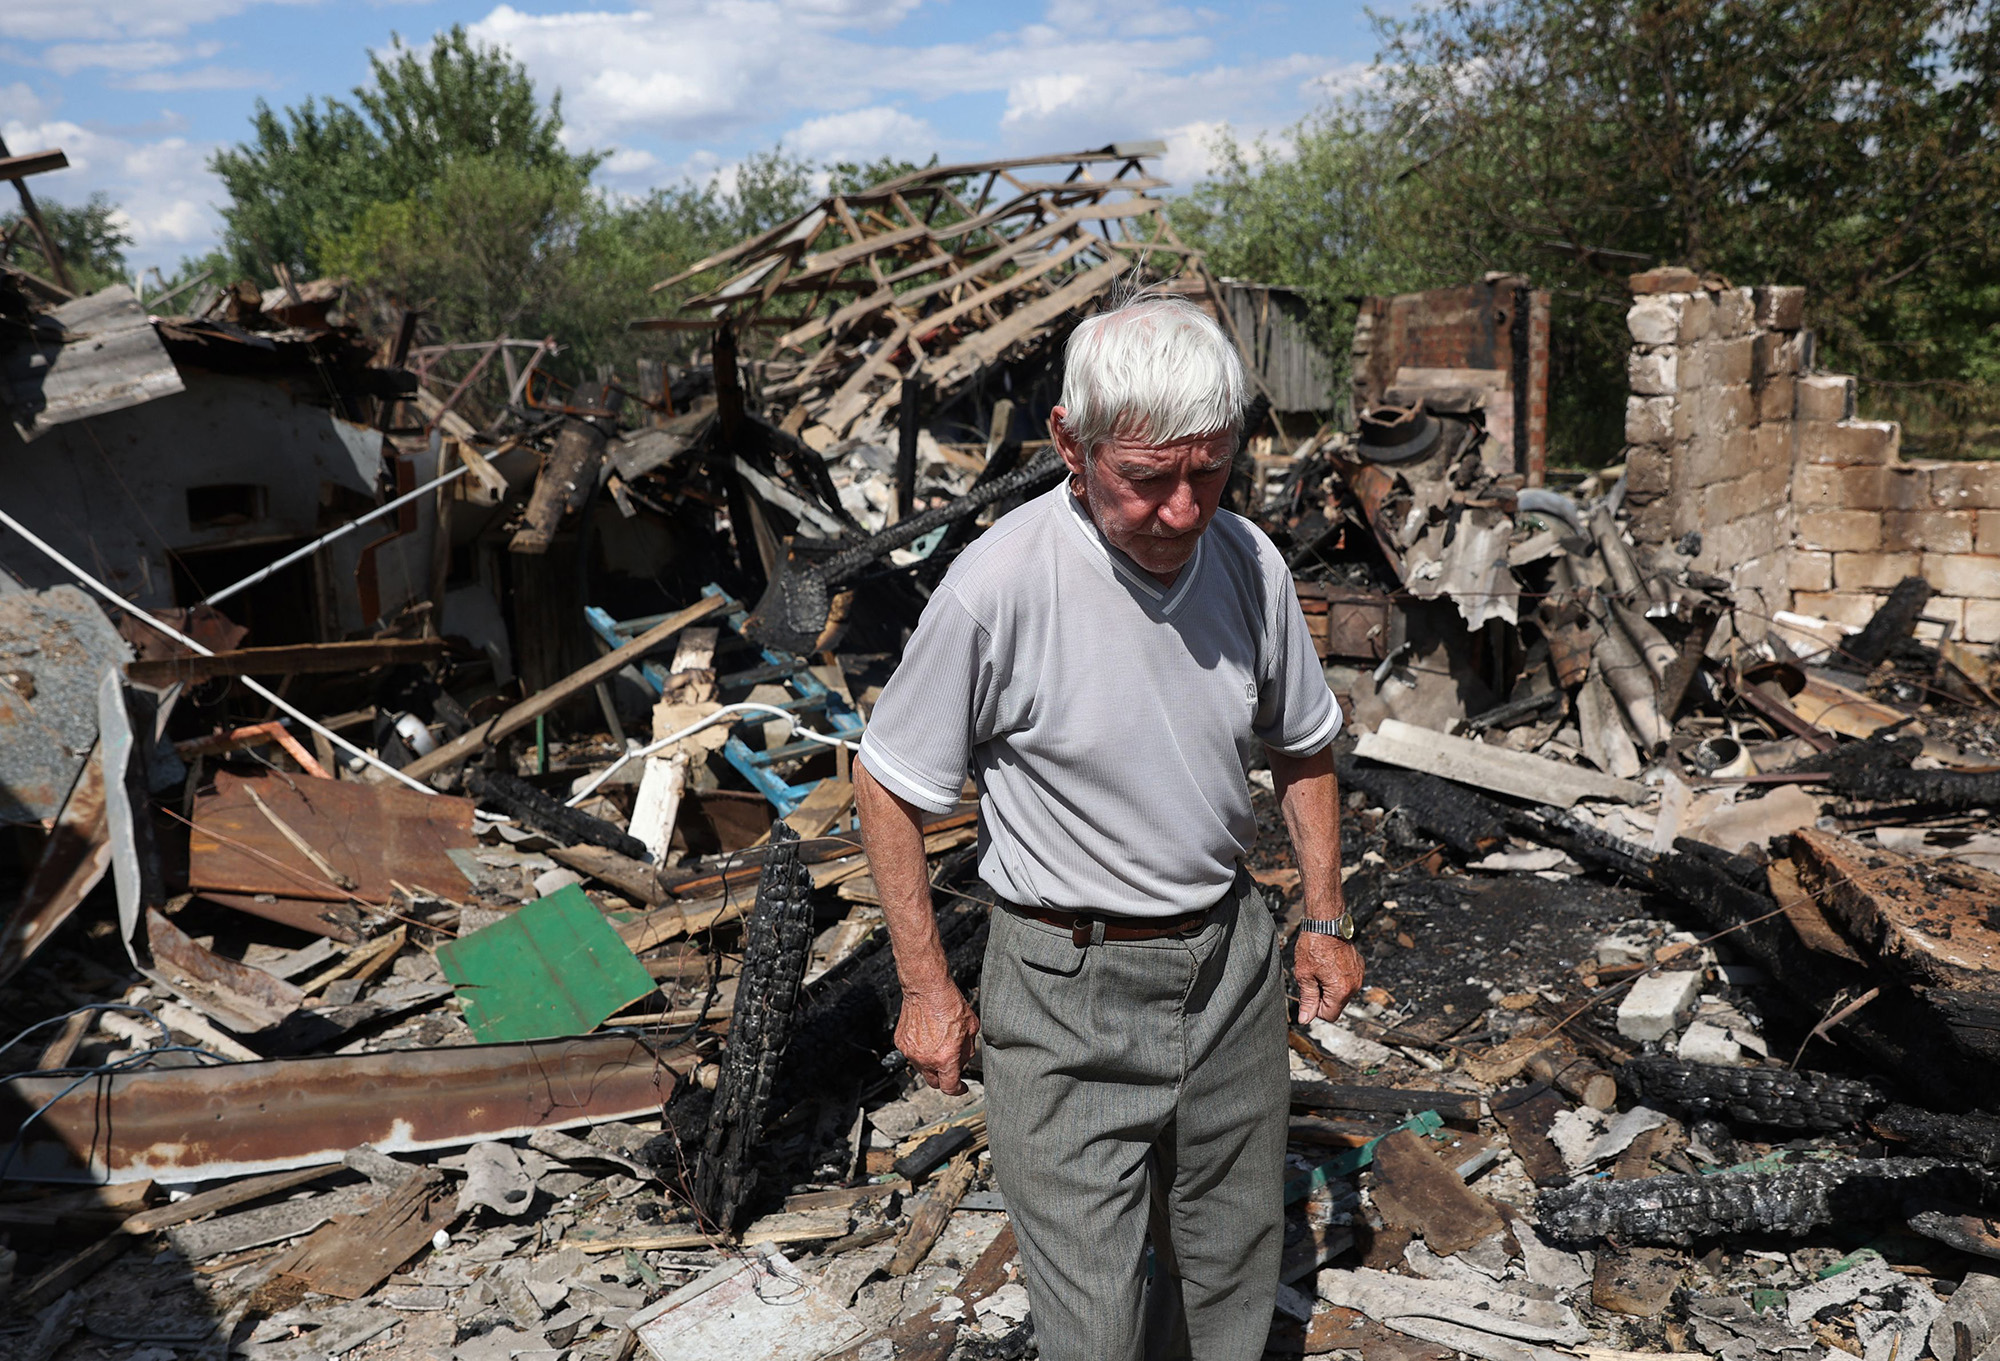 A resident stands next to his home that was shelled in Bakhmut, Ukraine on July 13.